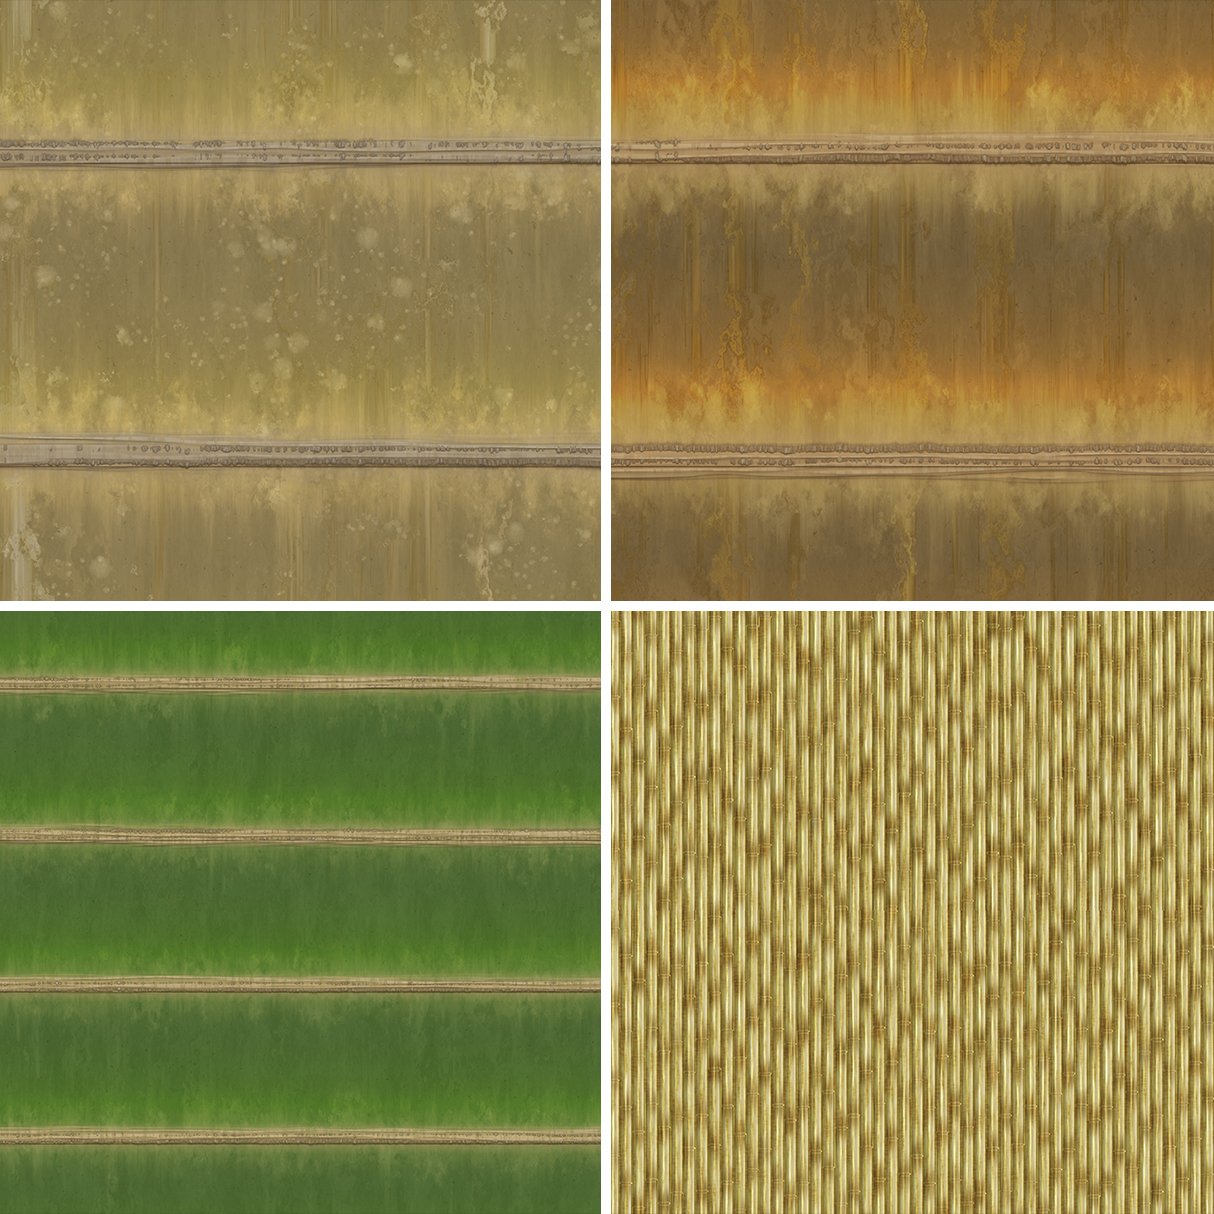 20 Bamboo Background Textures Square Samples Preview 2